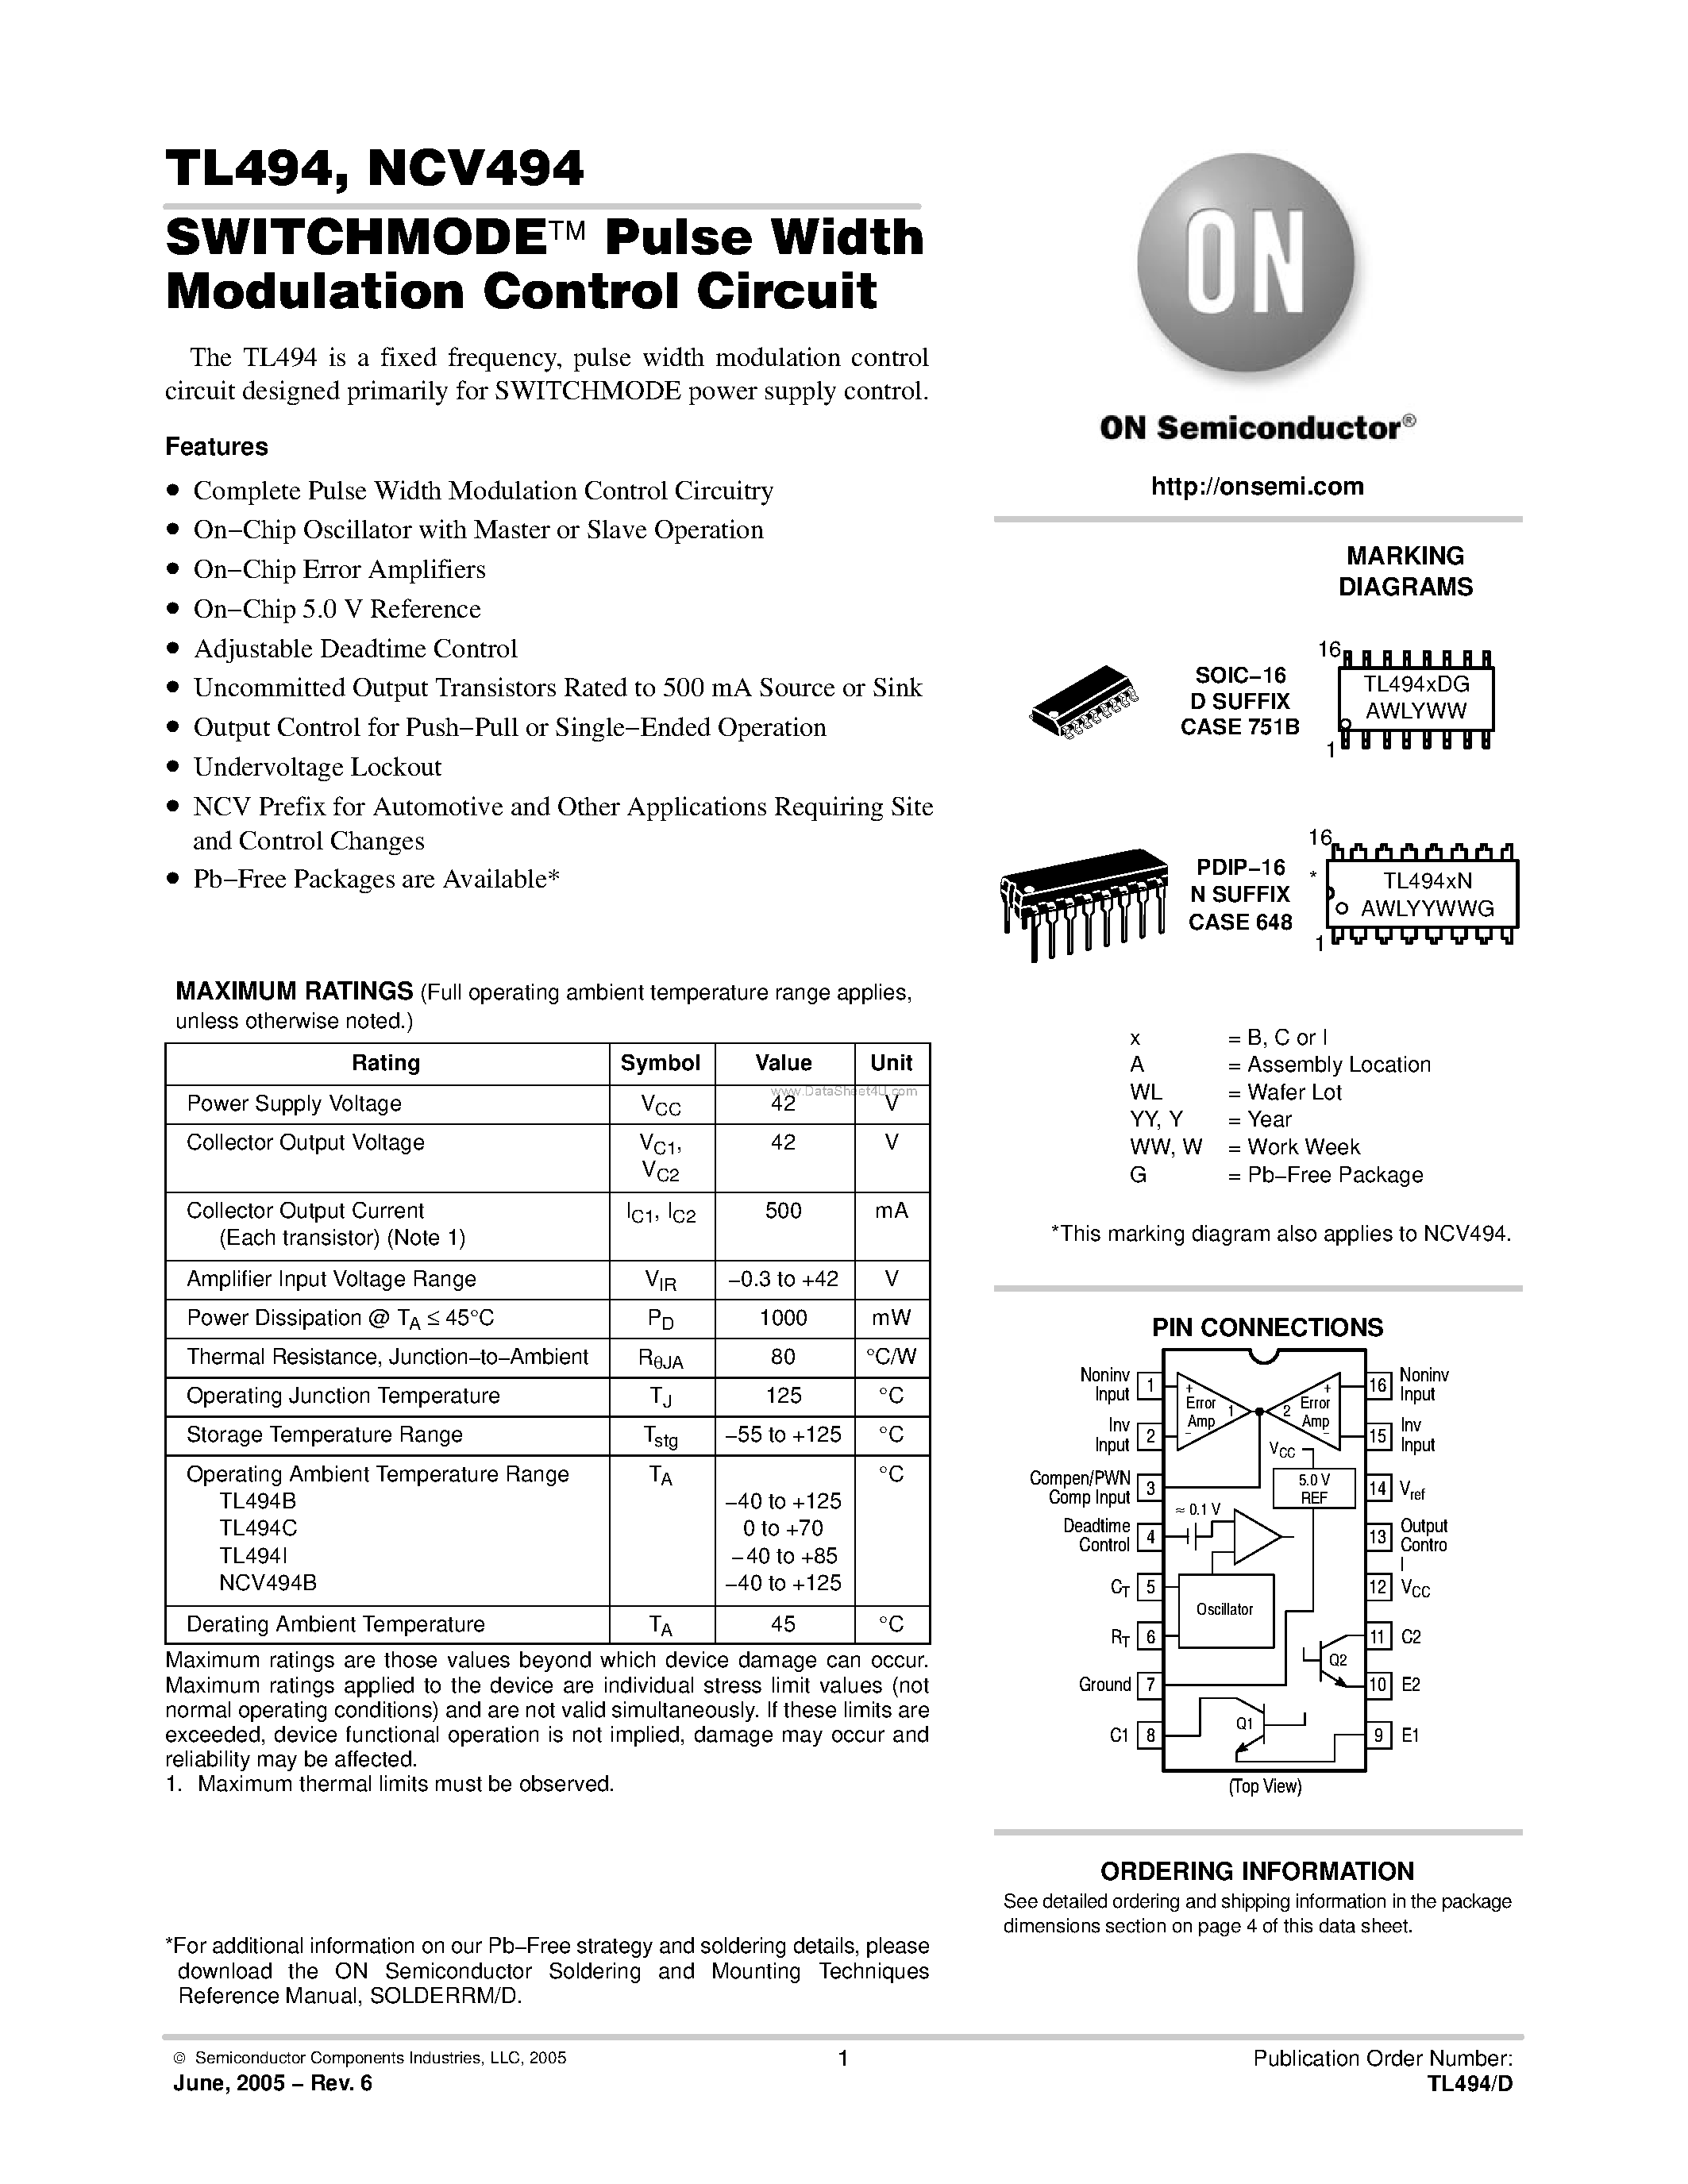 Datasheet TL494 - SWITCHMODE PULSE WIDTH MODULATION CONTROL CIRCUIT page 1